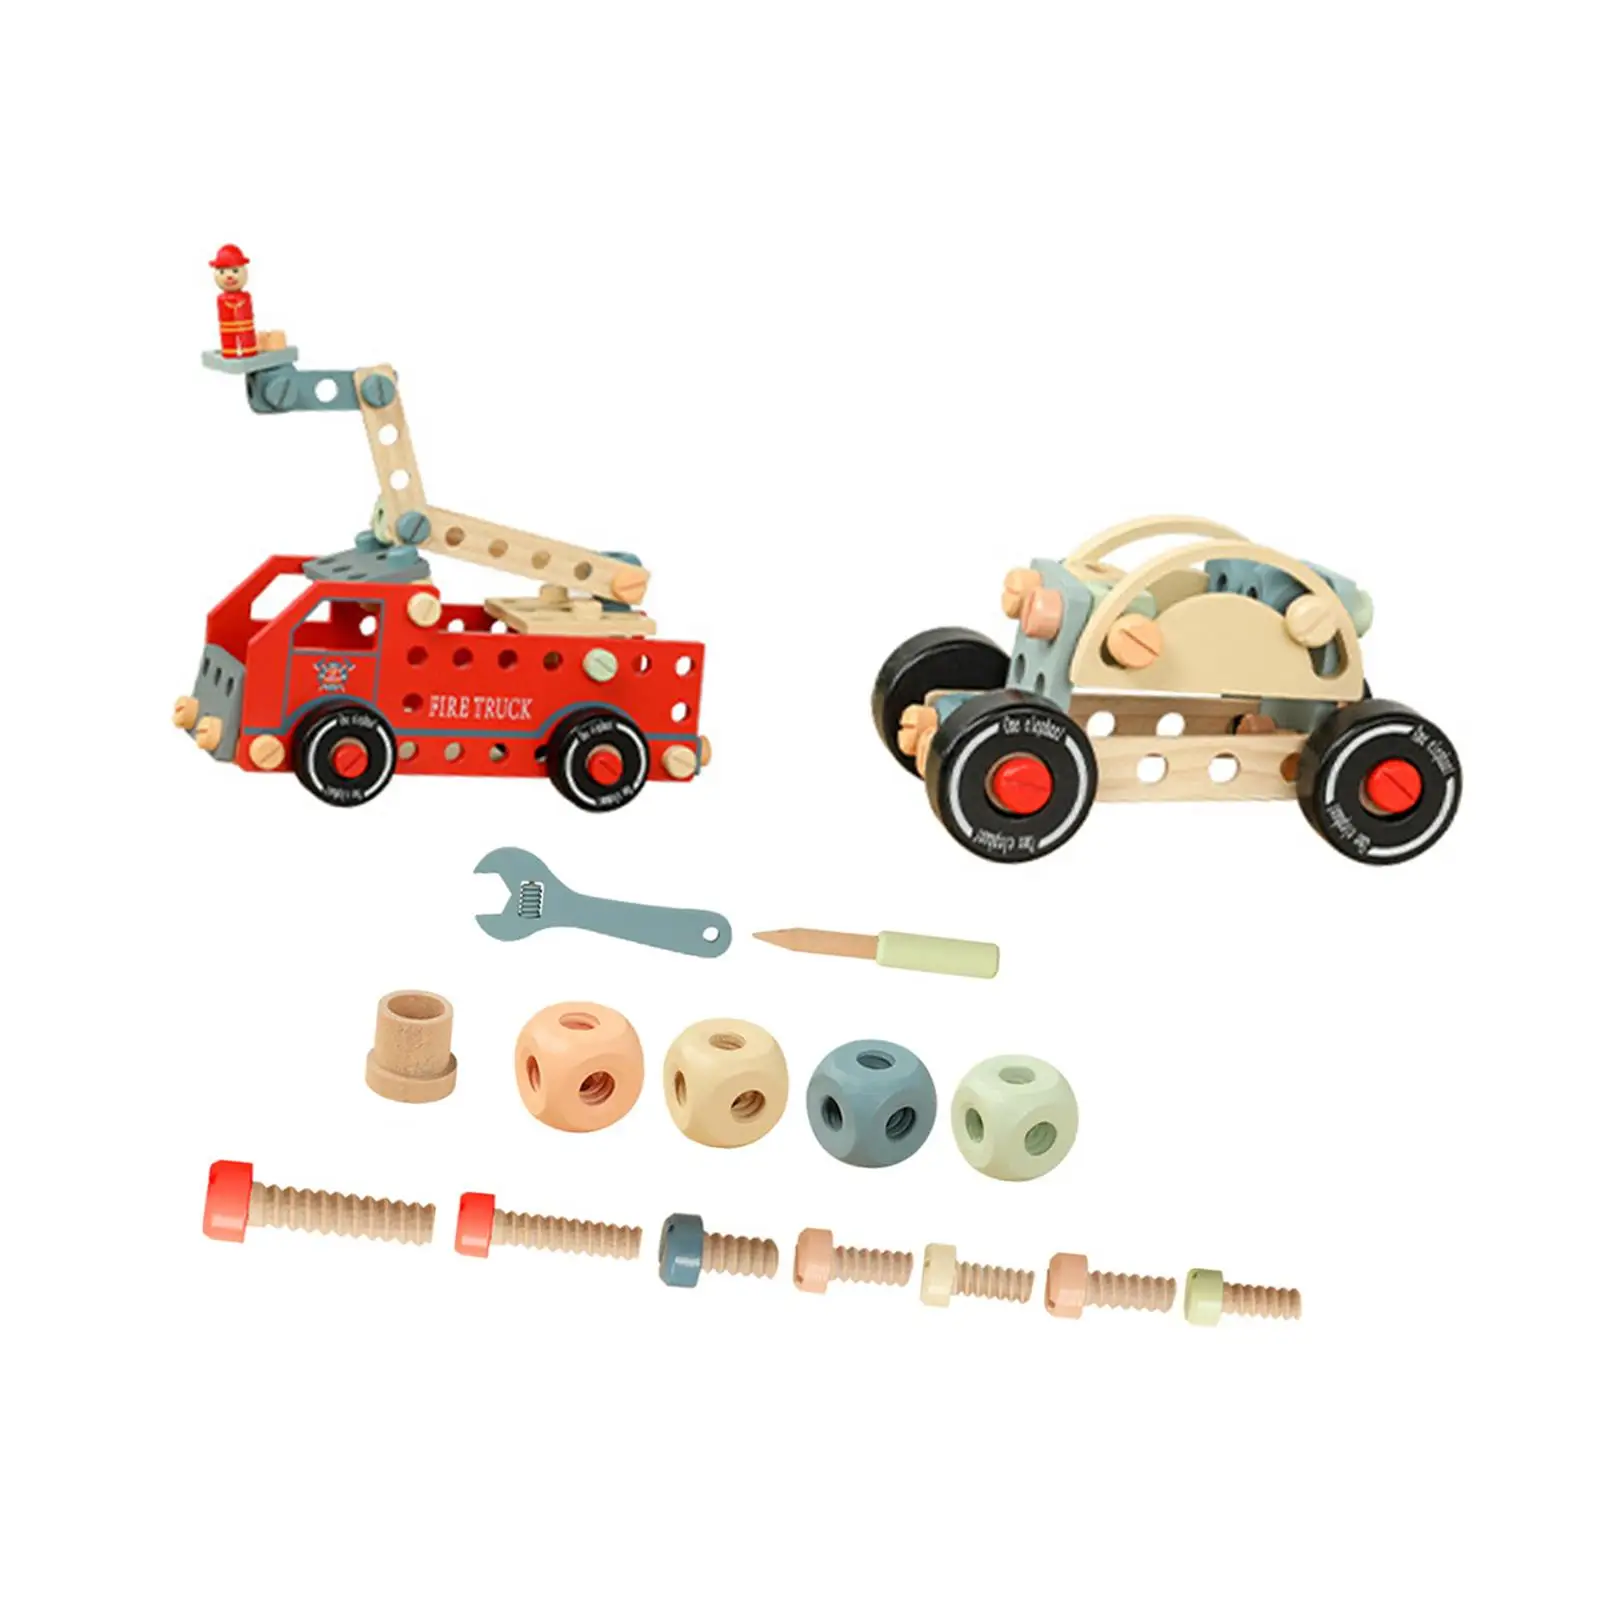 Kids Construction Toy Set Cognitive for Education Learning Outdoor Education